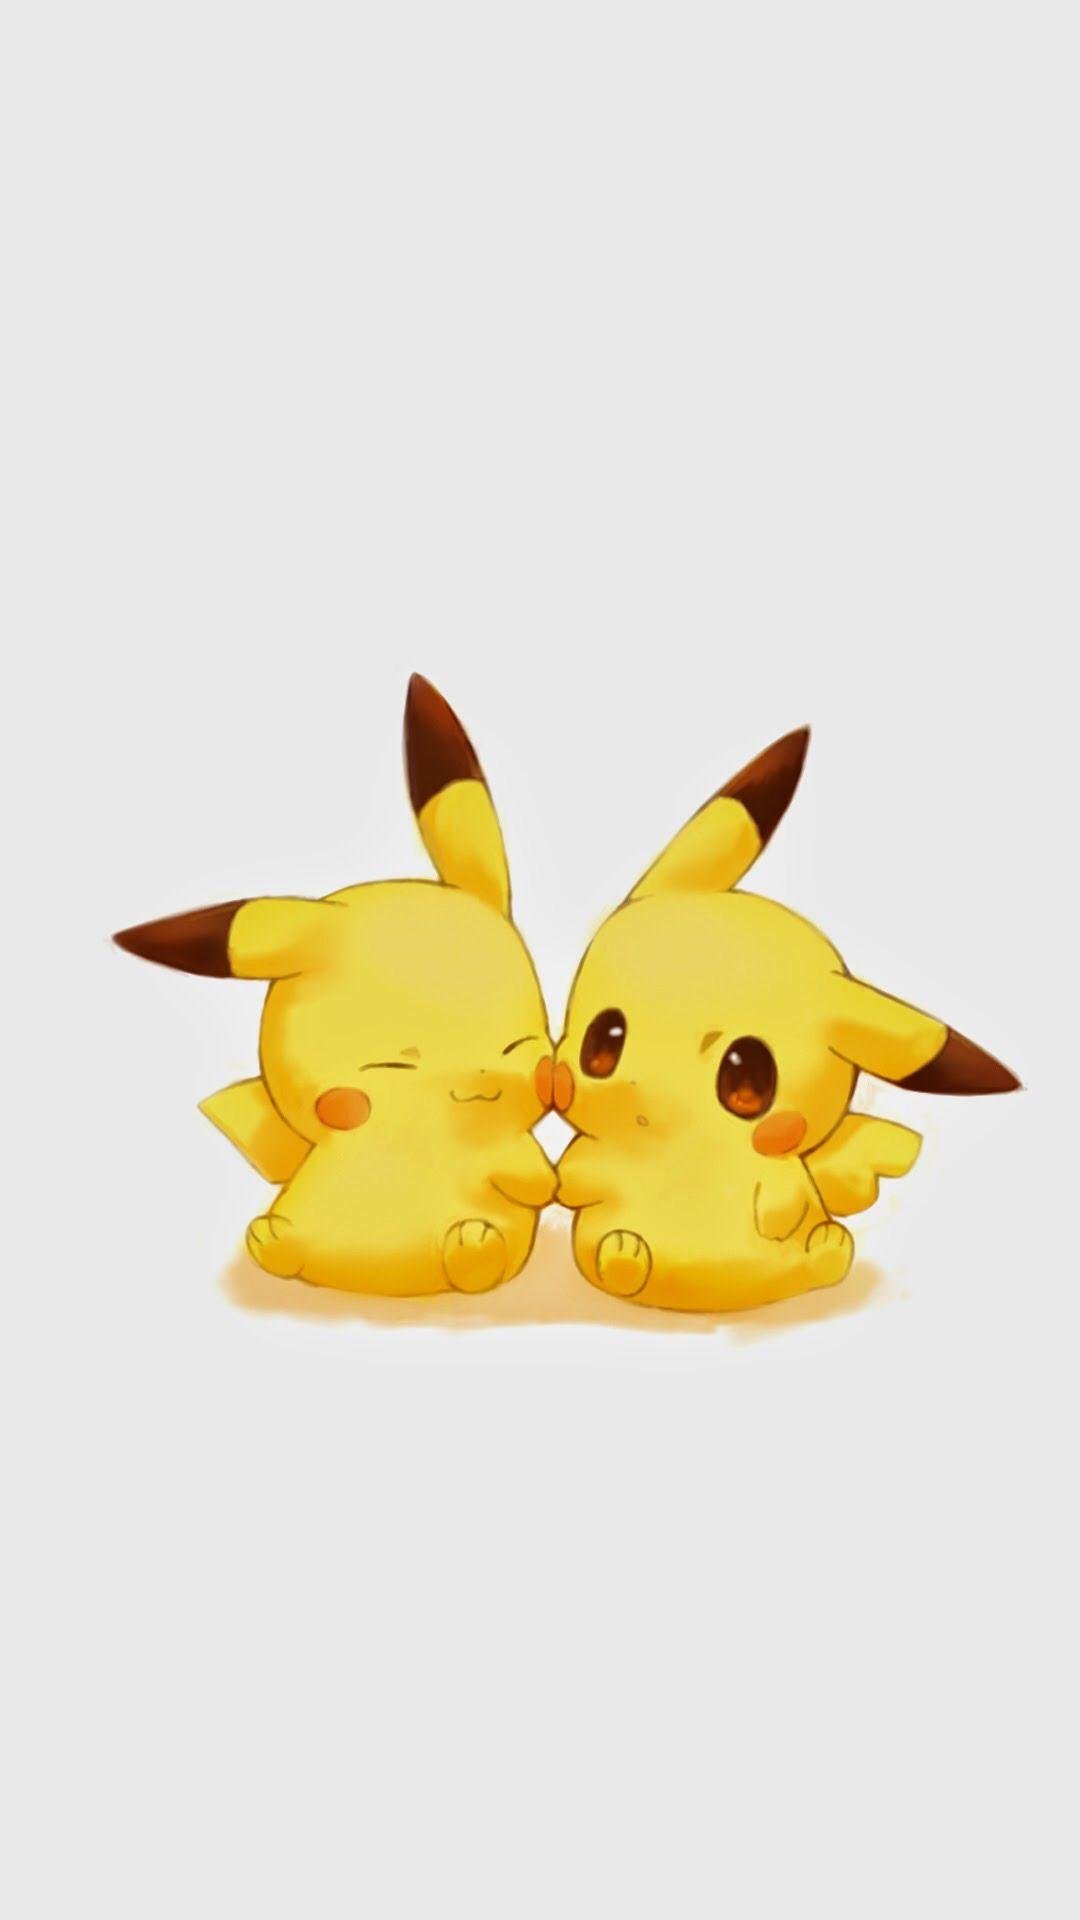 Funny Cute Pokémon Phone Wallpapers  Wallpaper Cave